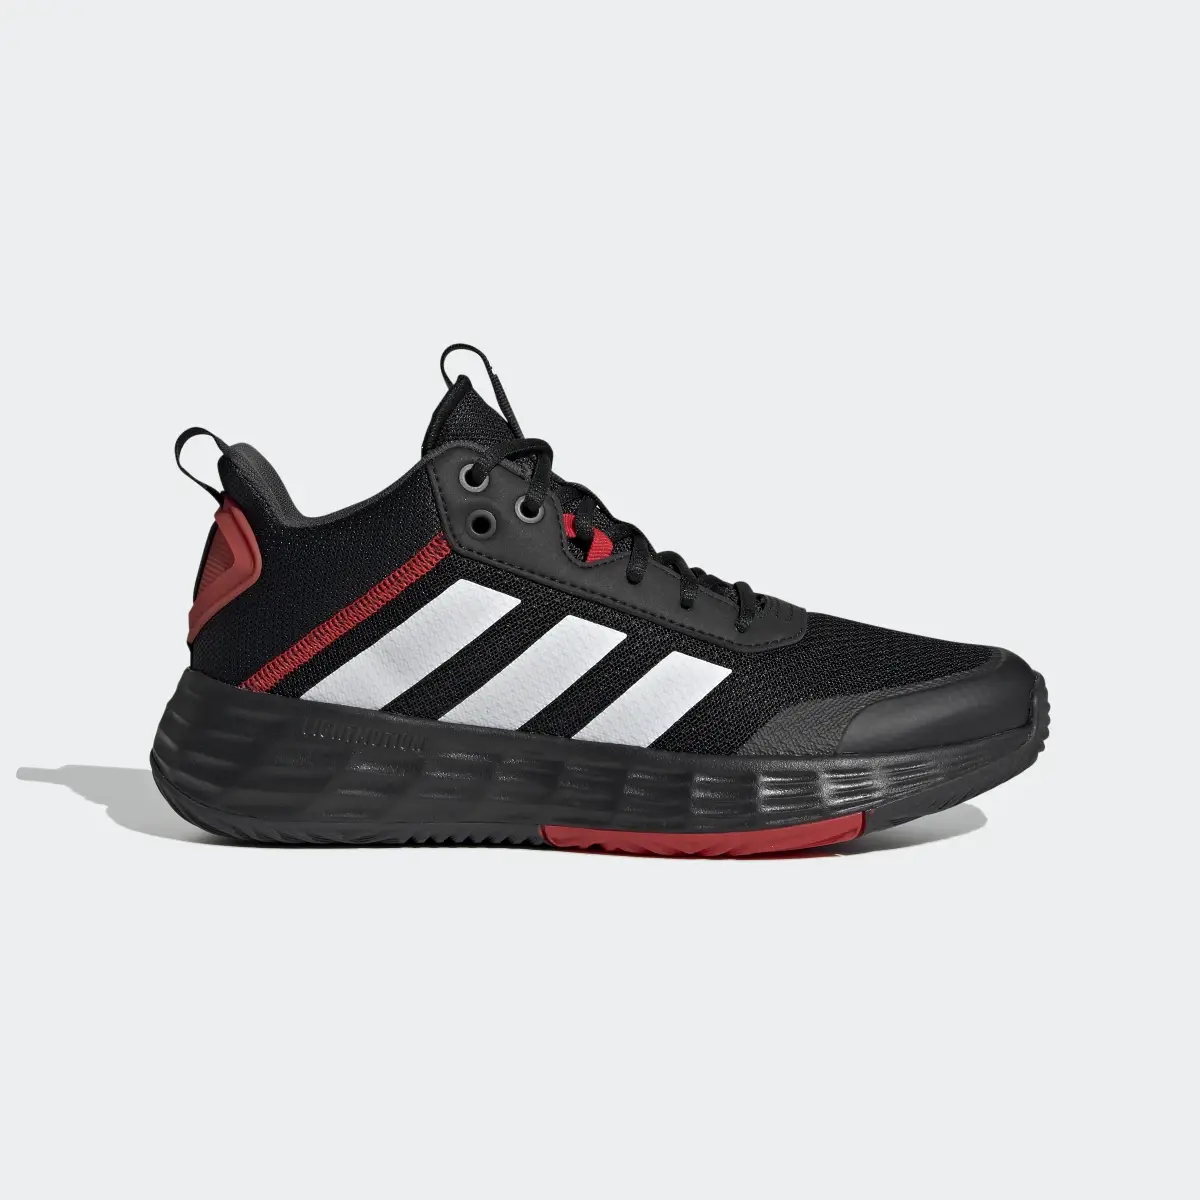 Adidas Ownthegame Shoes. 2